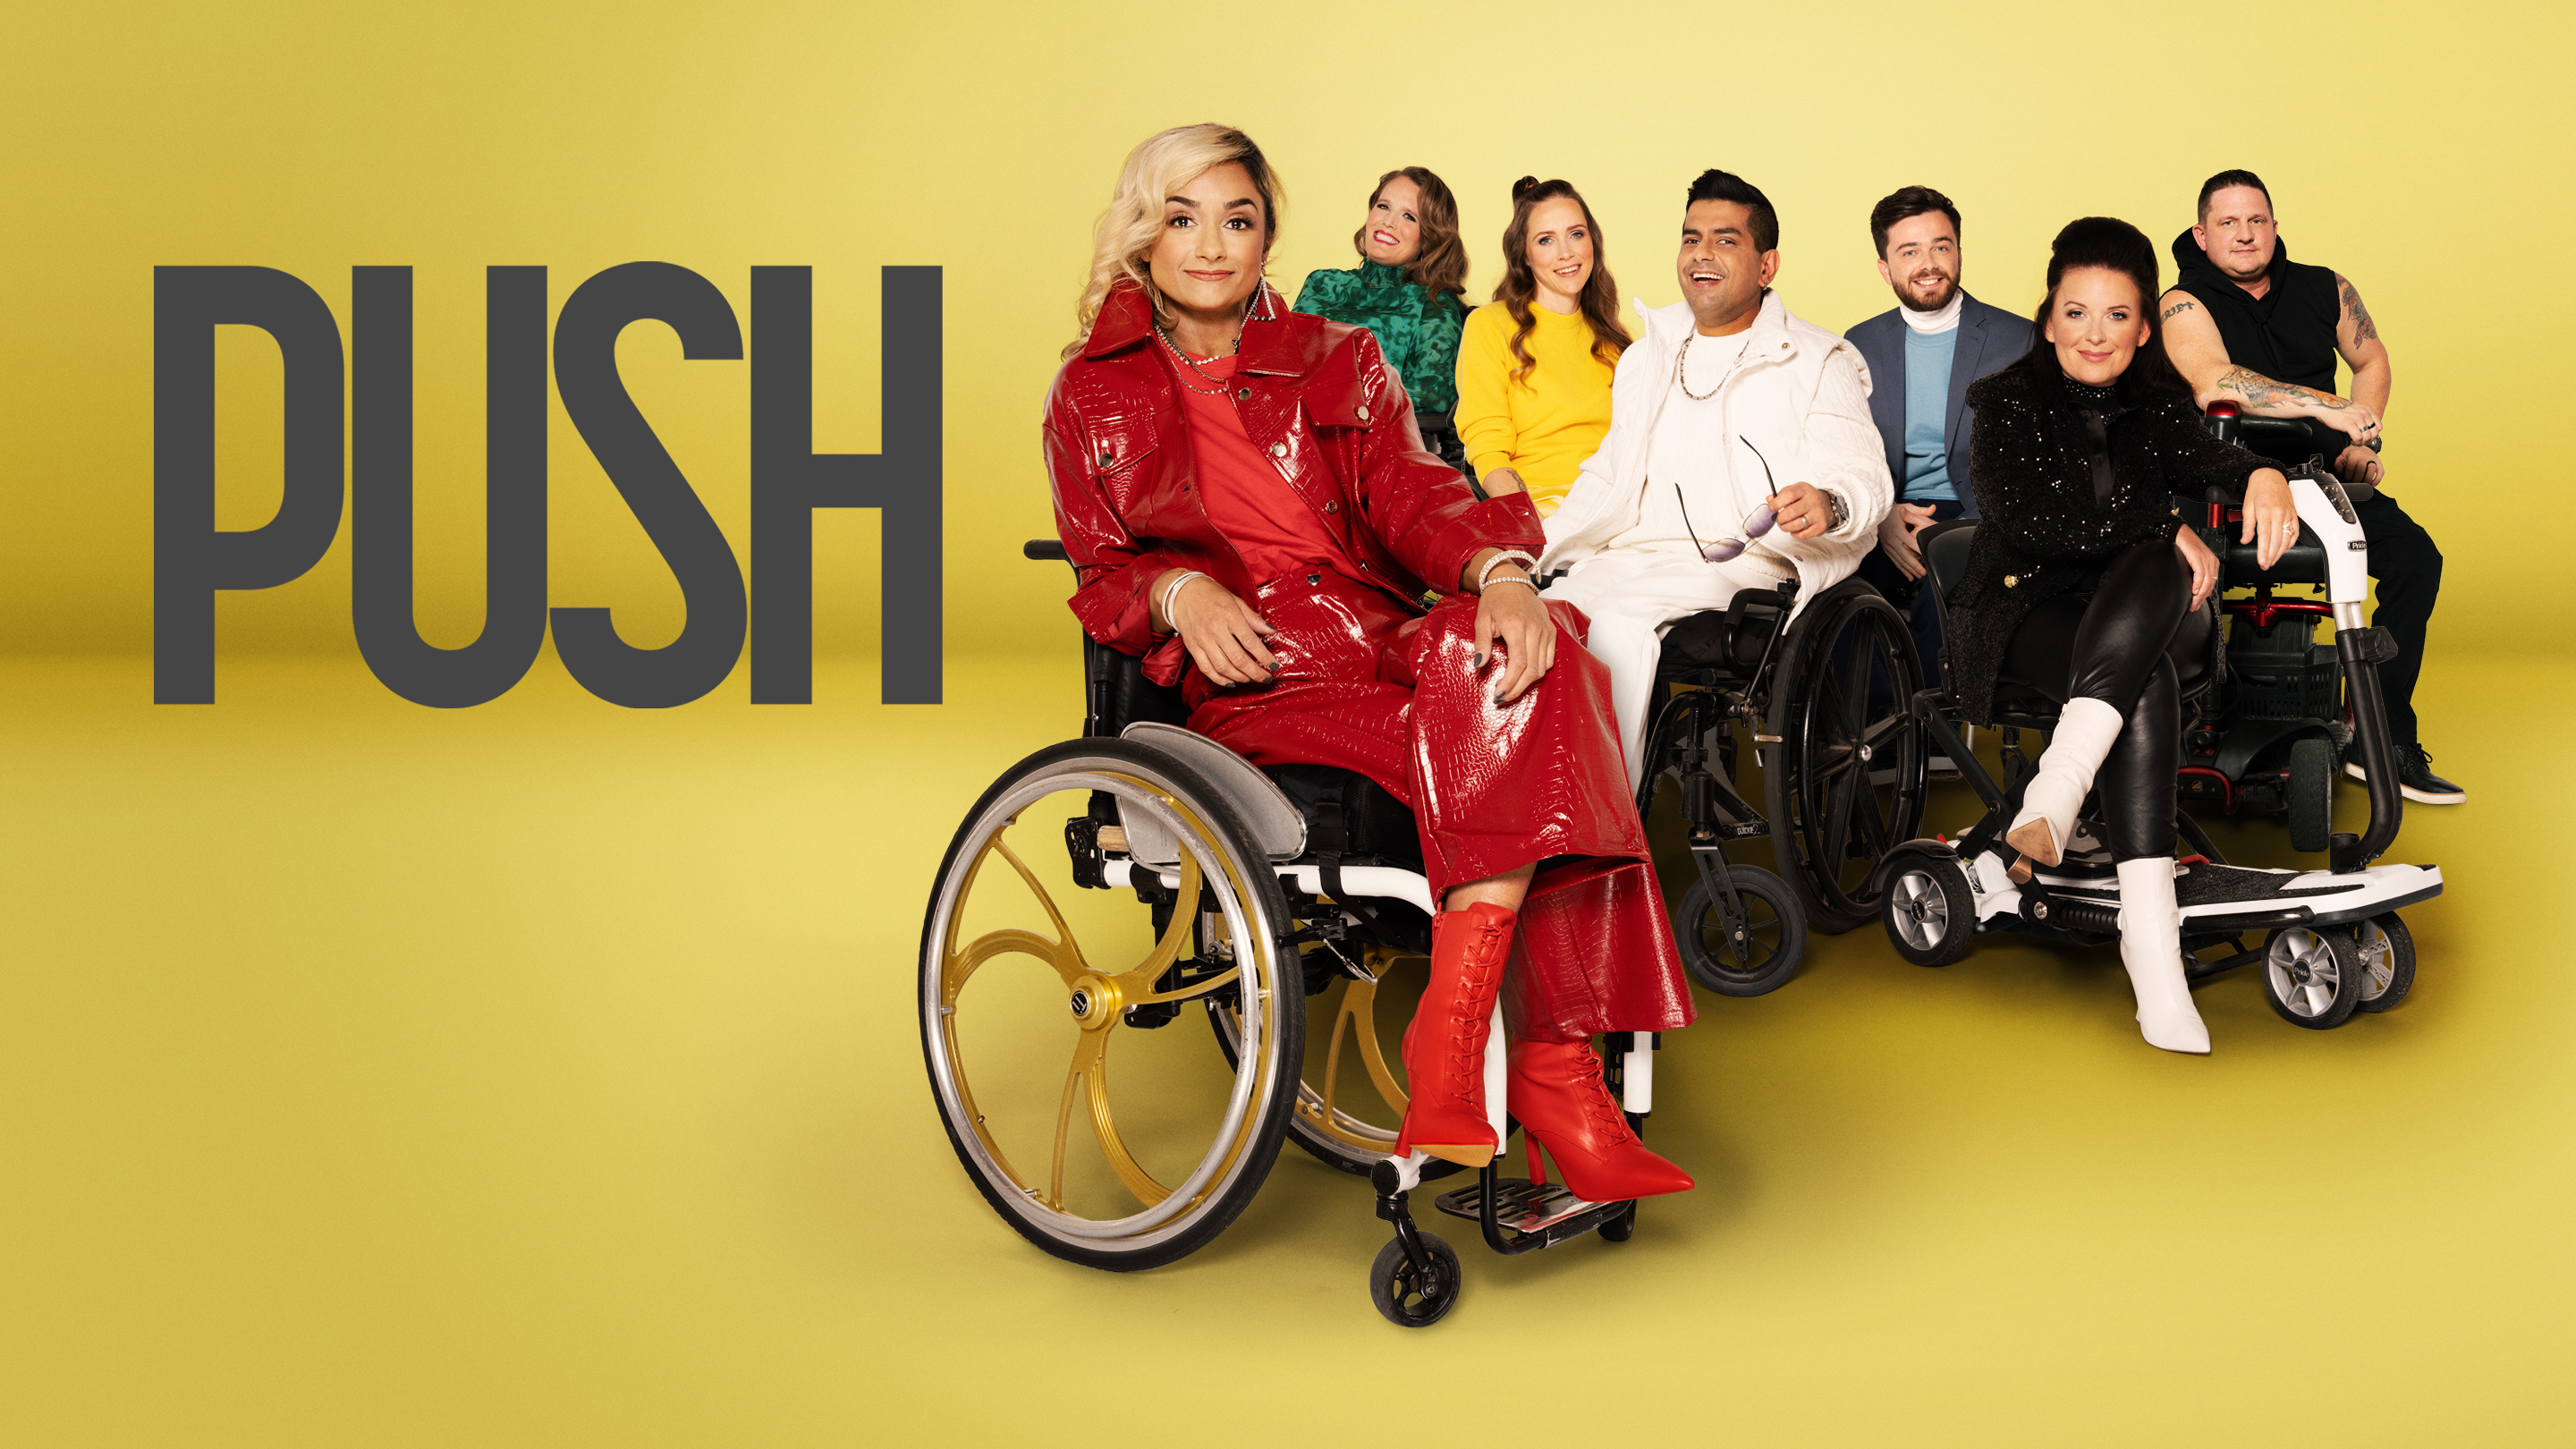 The cast of Push